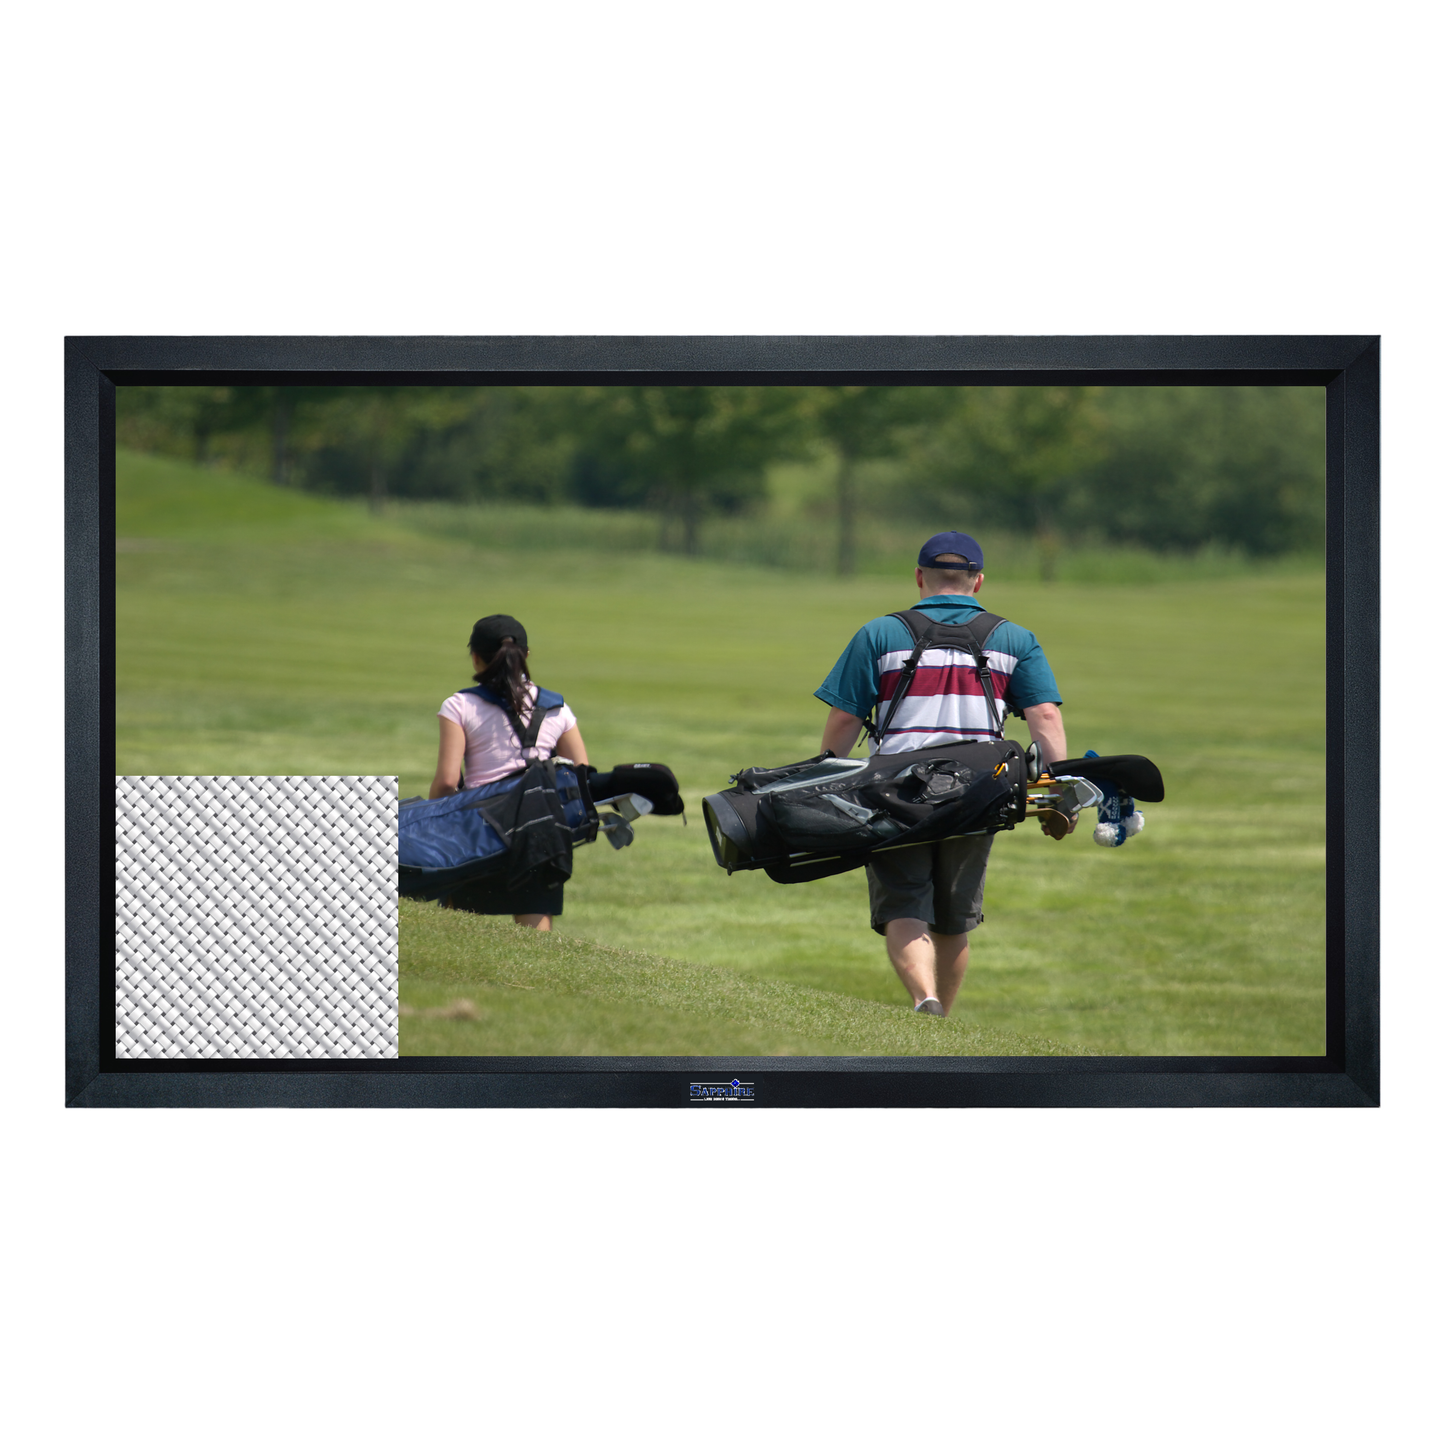 Acoustically Transparent Sapphire Fixed Frame Front Projection Screen Viewing Area 3011mm x 1693mm 16:9 Format